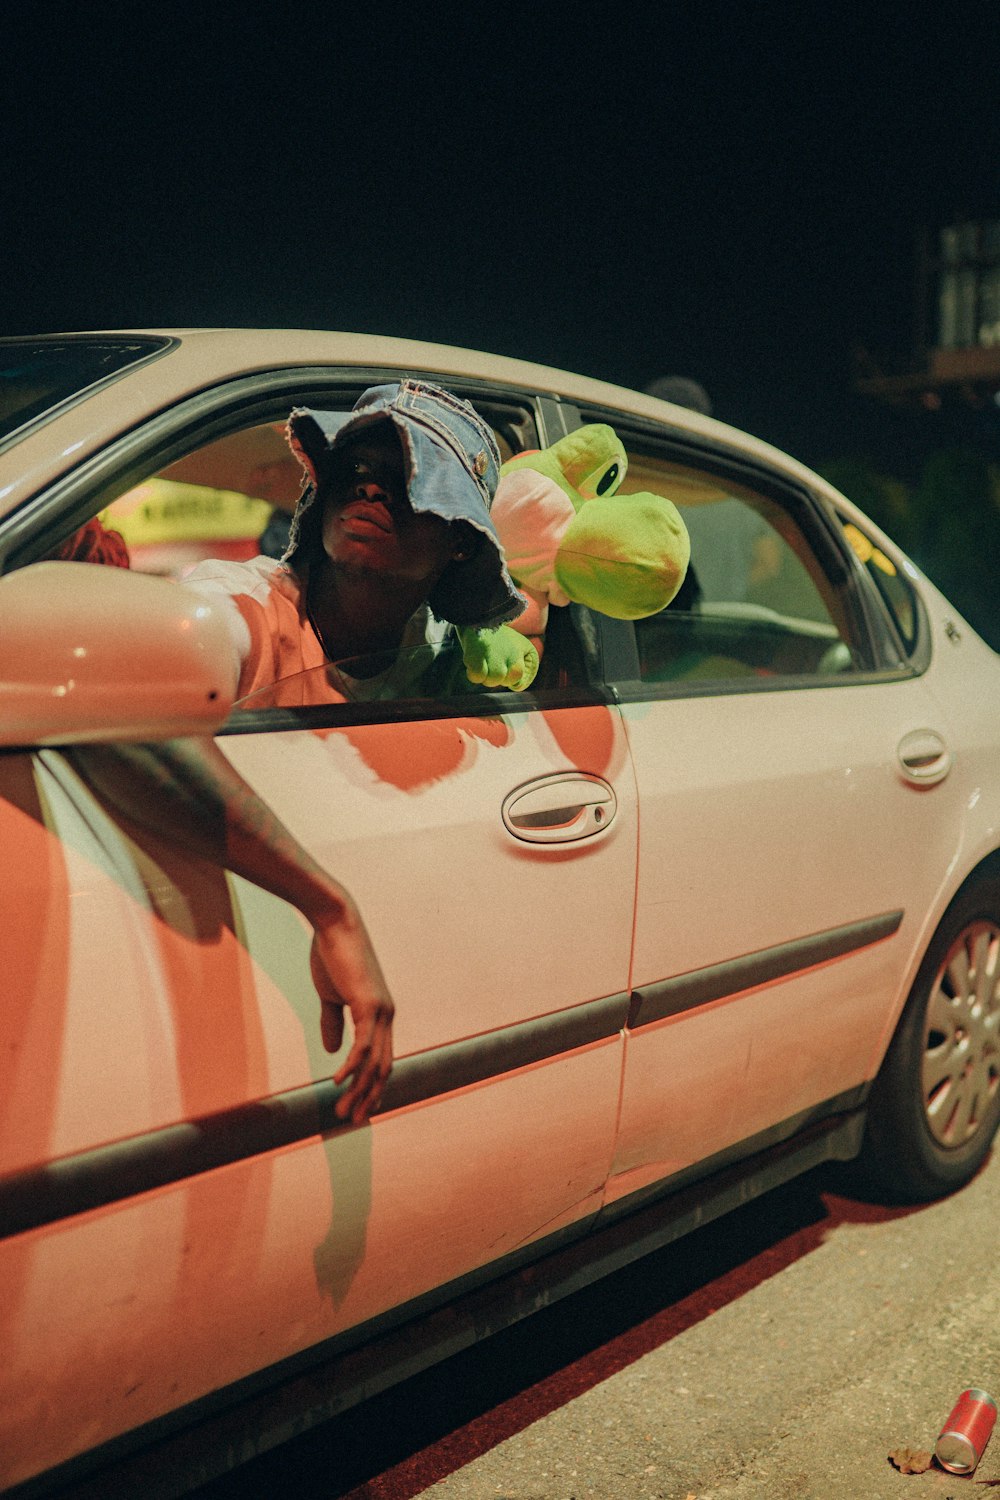 a man sitting in a car with stuffed animals in the window